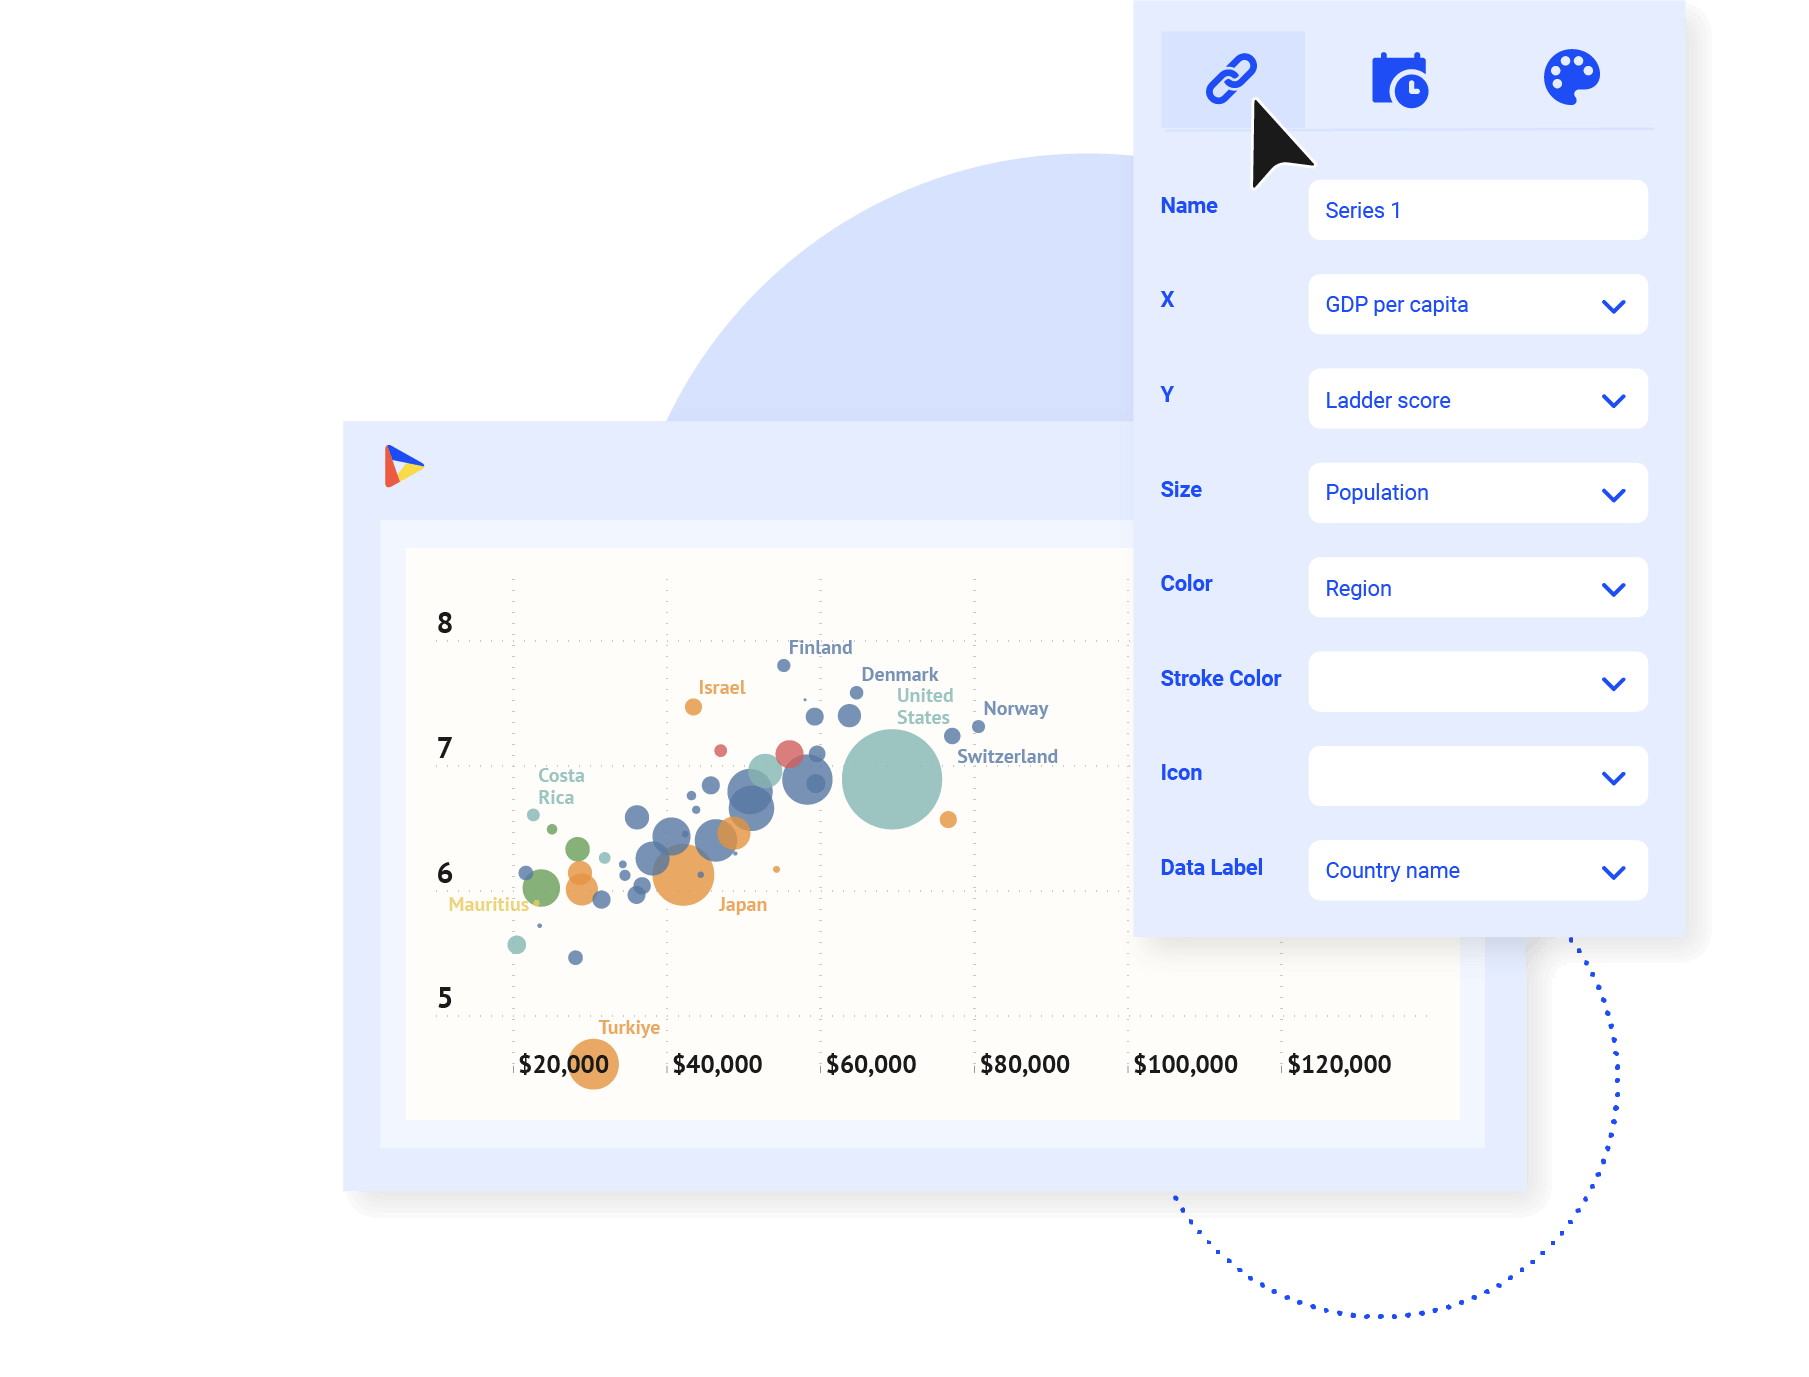 Data-driven styling - Let your data drive the look & feel of your chart. Style series and data points with ease. Bind the colors, shapes, strokes, size, radius, and label text to your data, empowering the reusability of your charts.